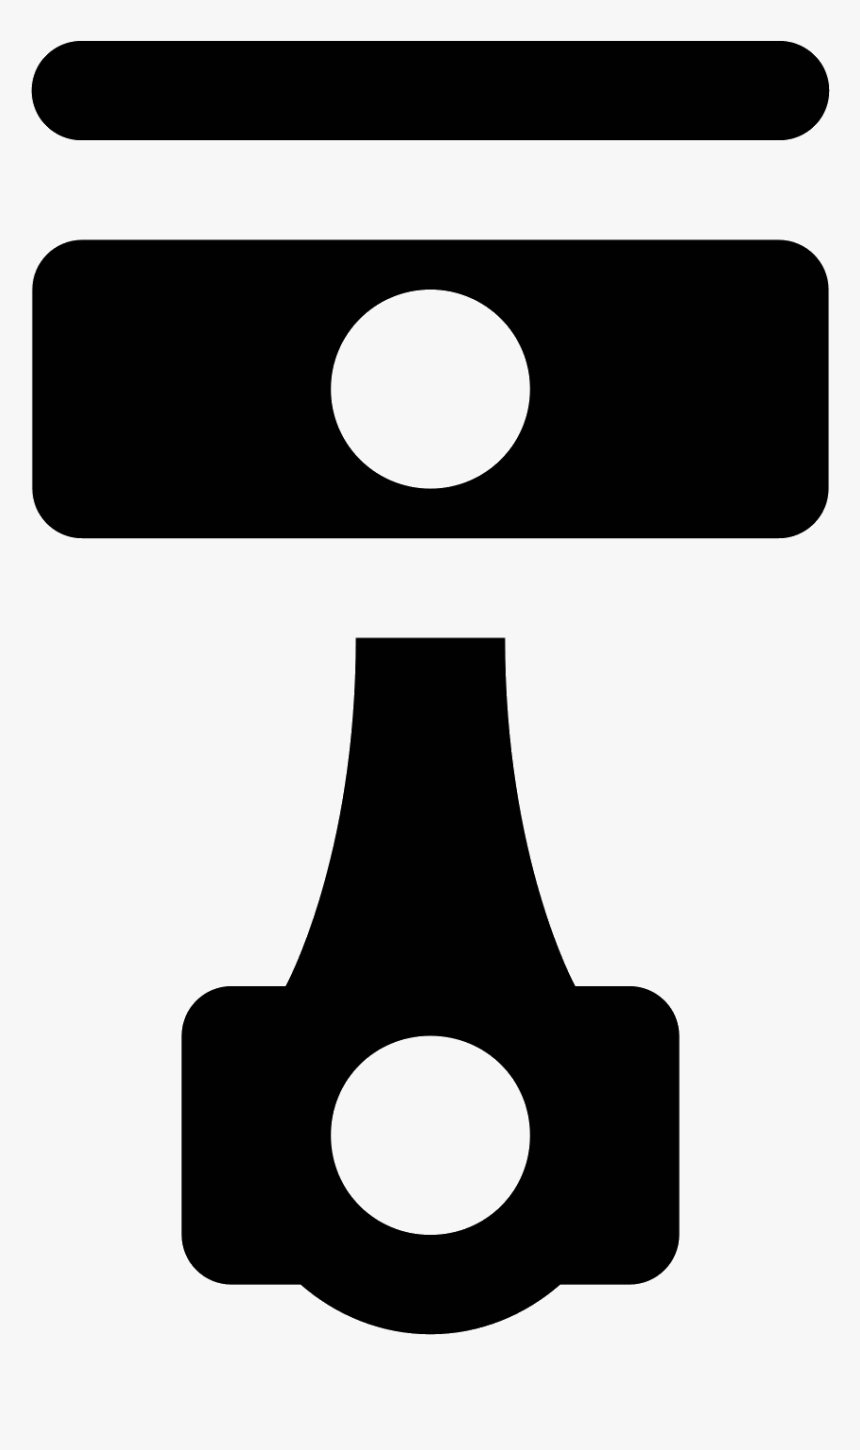 This Logo Represents A Piston And Is Made Up Of A Rectangle, HD Png Download, Free Download